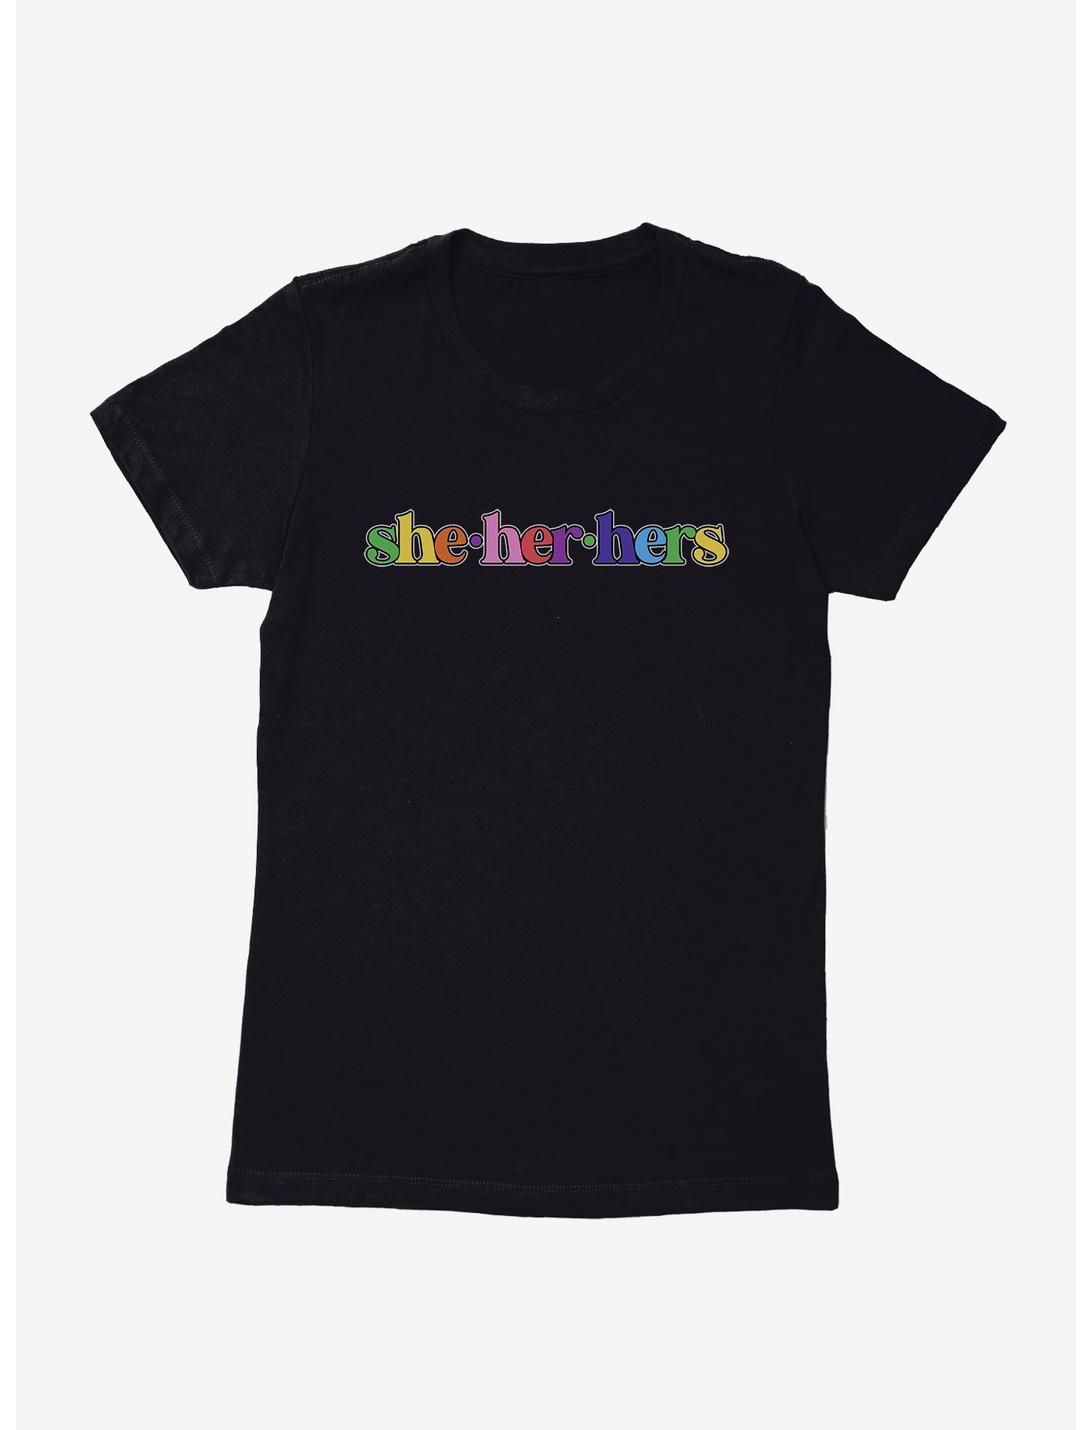 Pride She Her Hers Pronouns T-Shirt, , hi-res